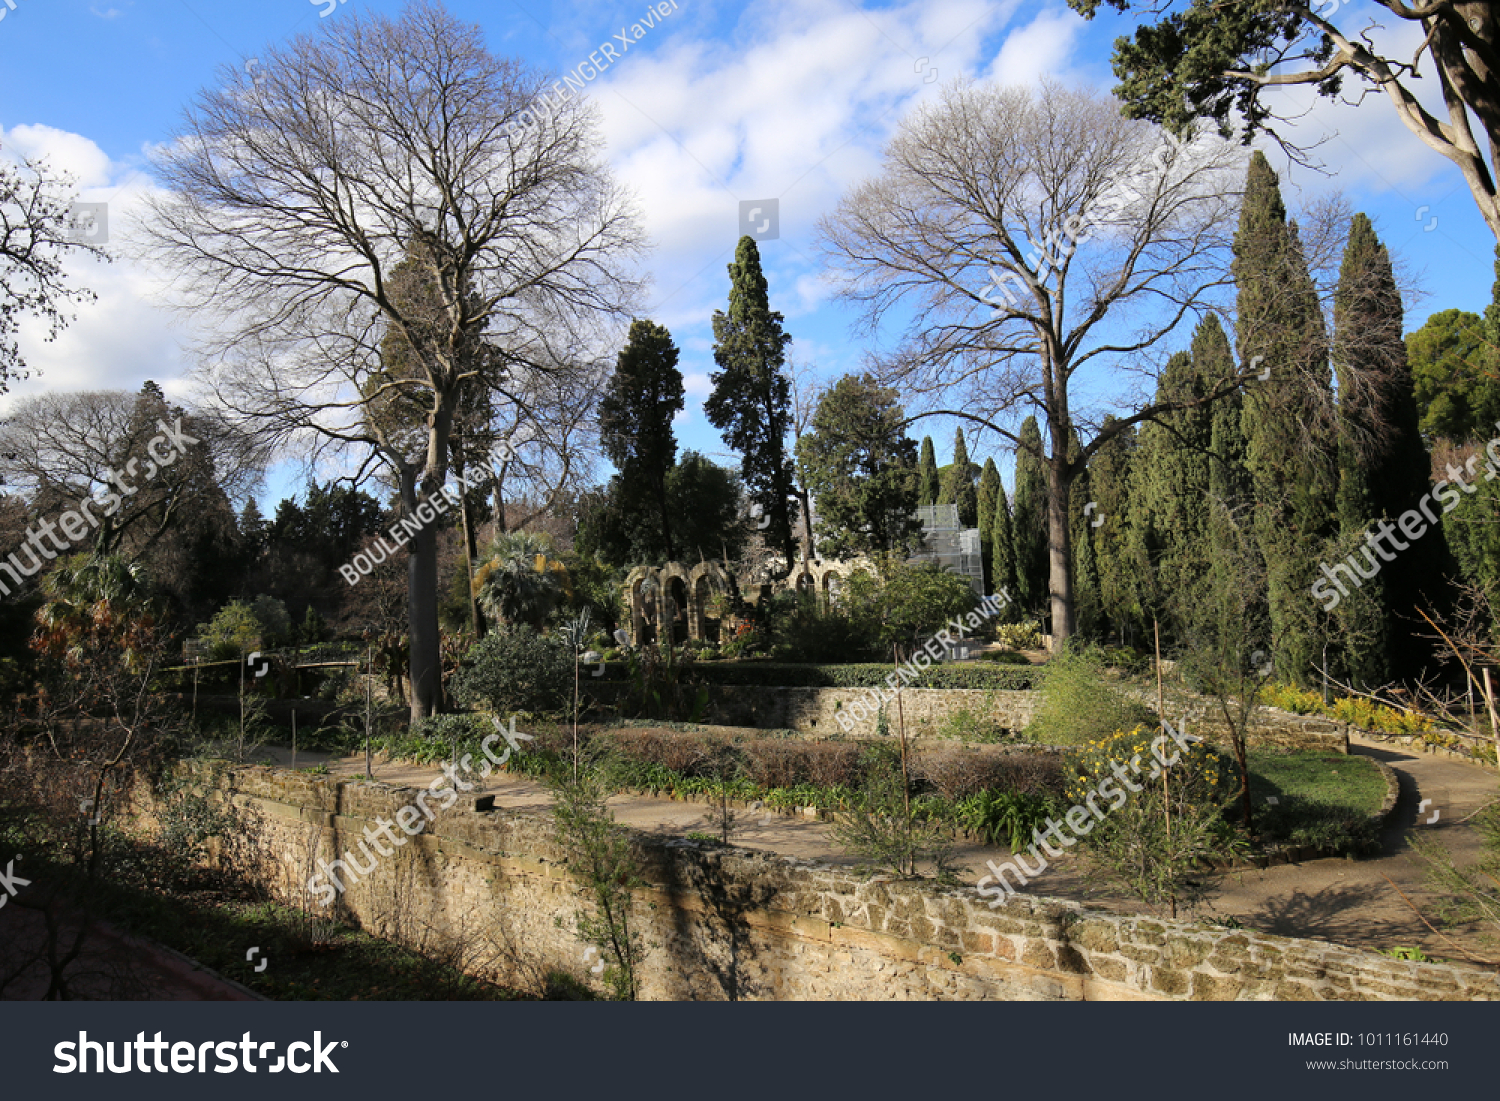 stock photo panoramic view of the botanical garden of montpellier france called jardin des plantes in french